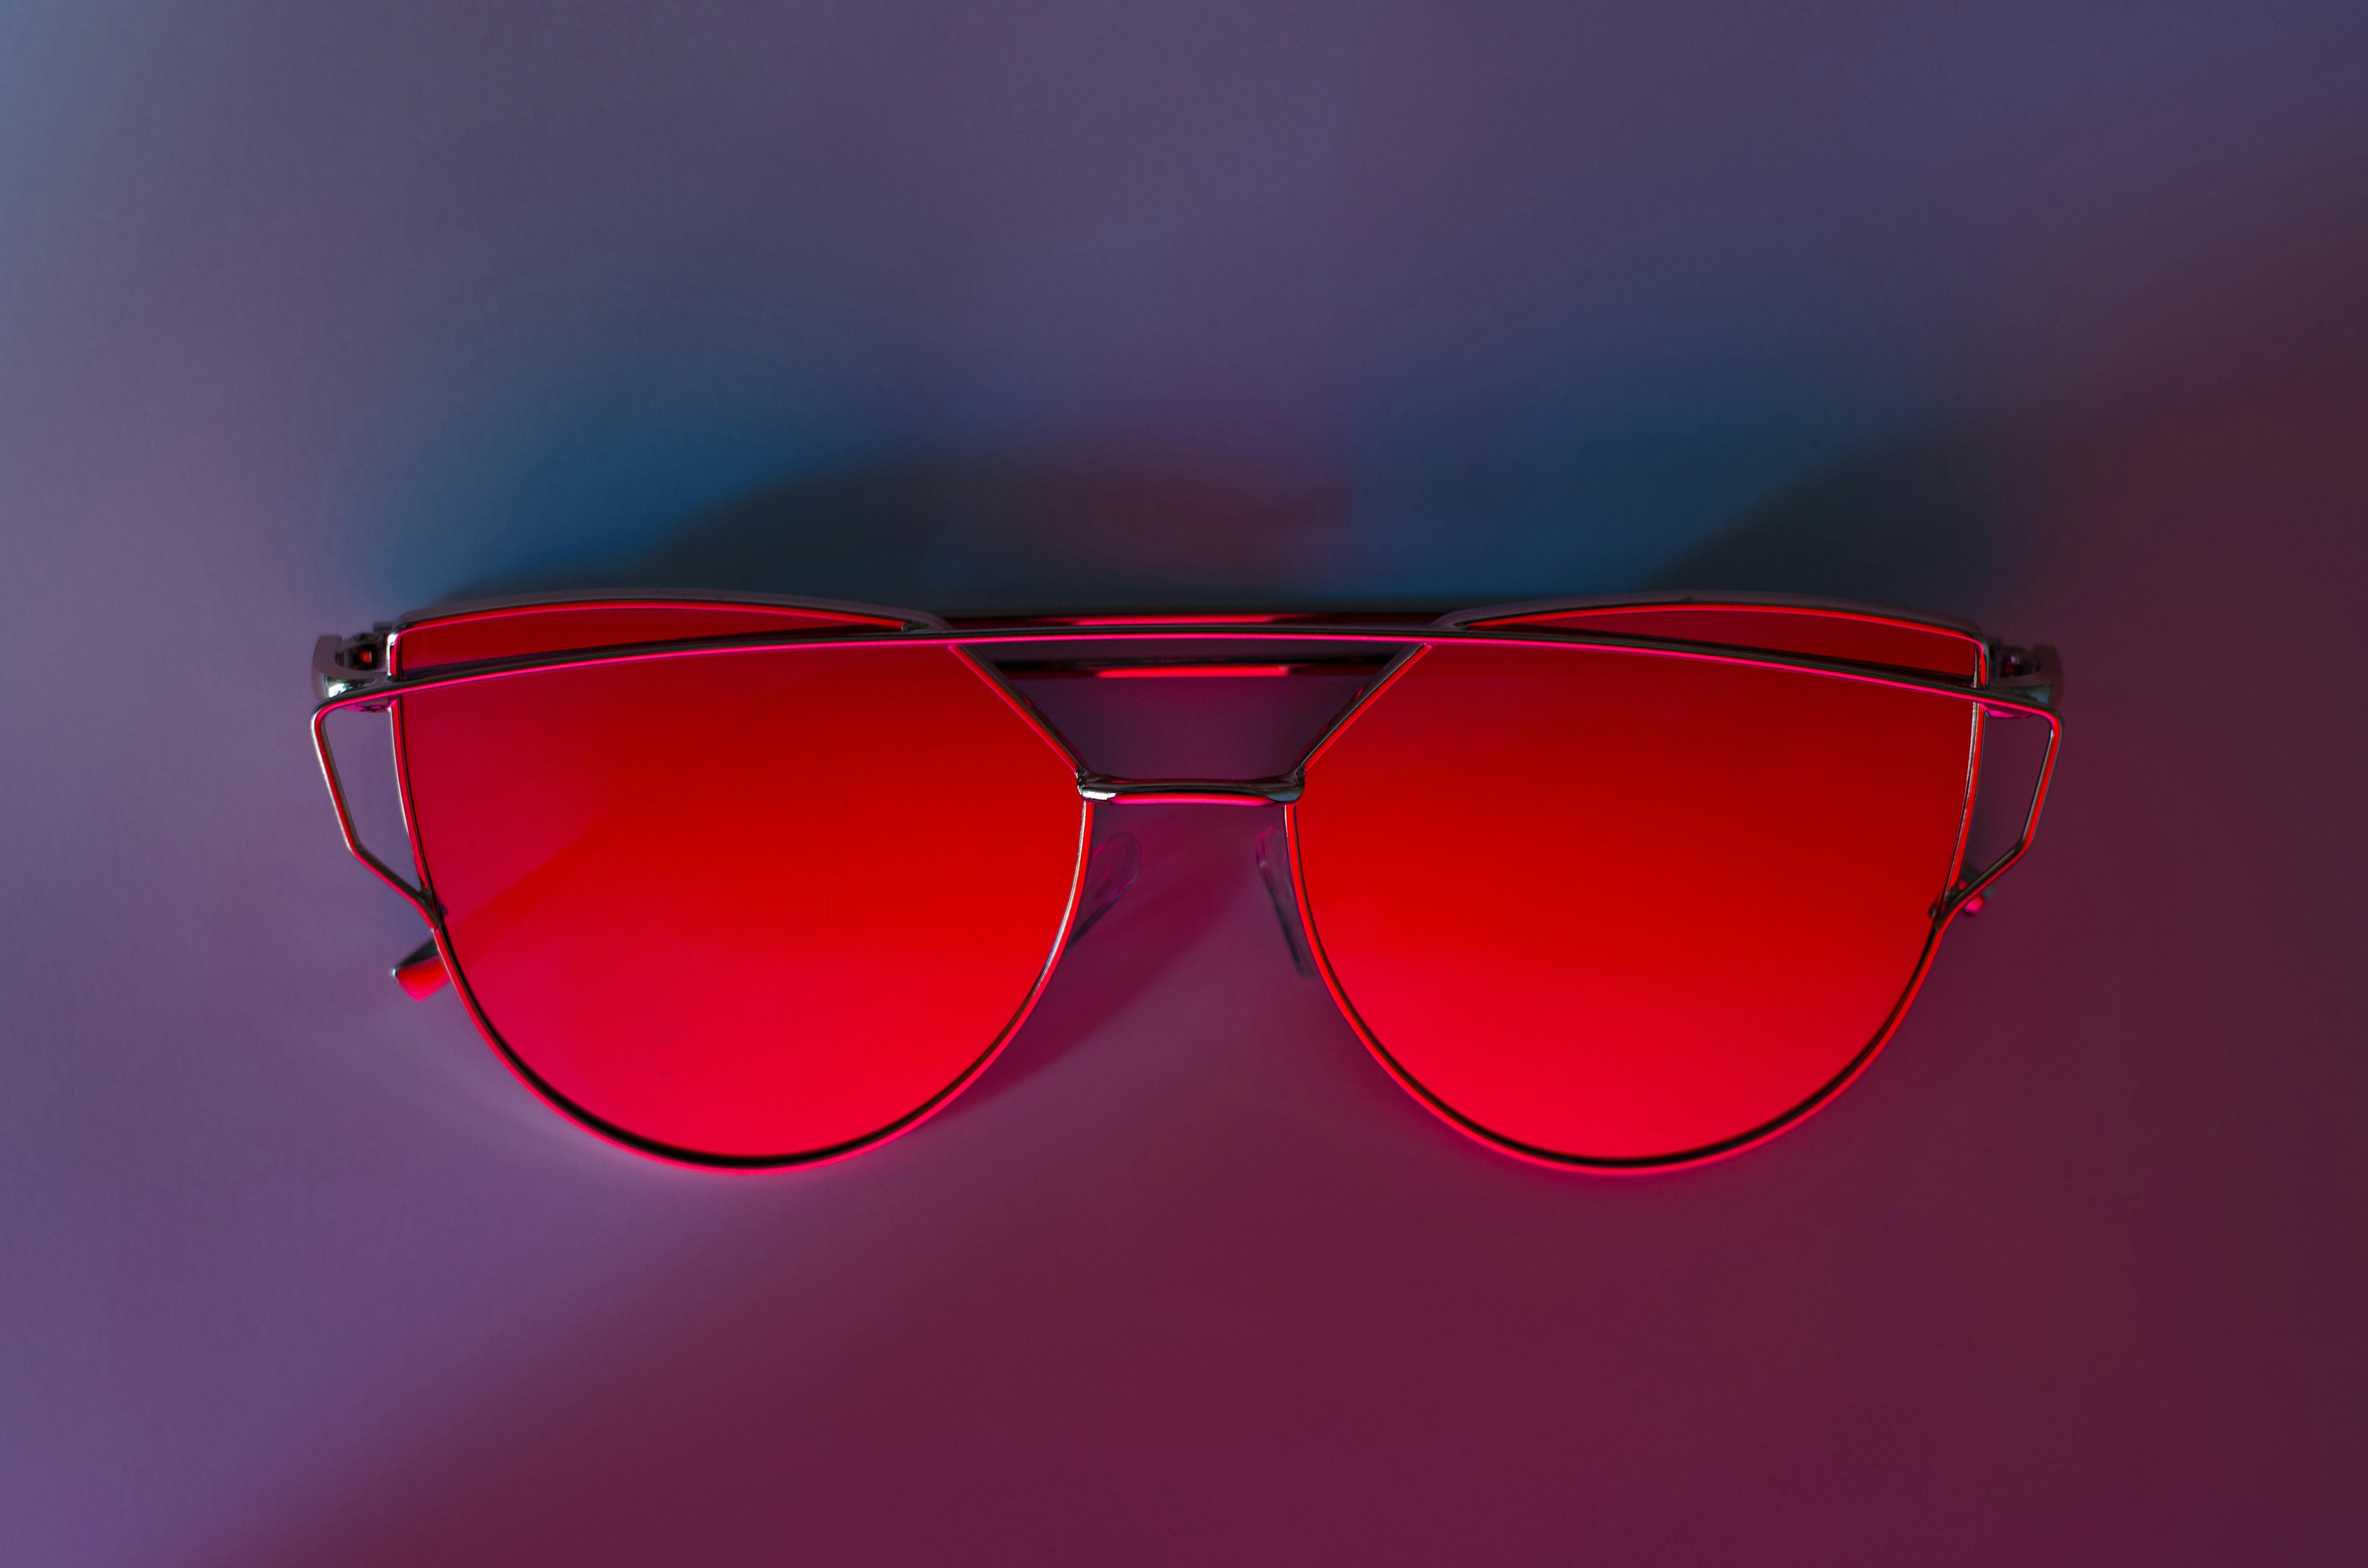 Red Sunglasses on Pink Surface · Free Stock Photo